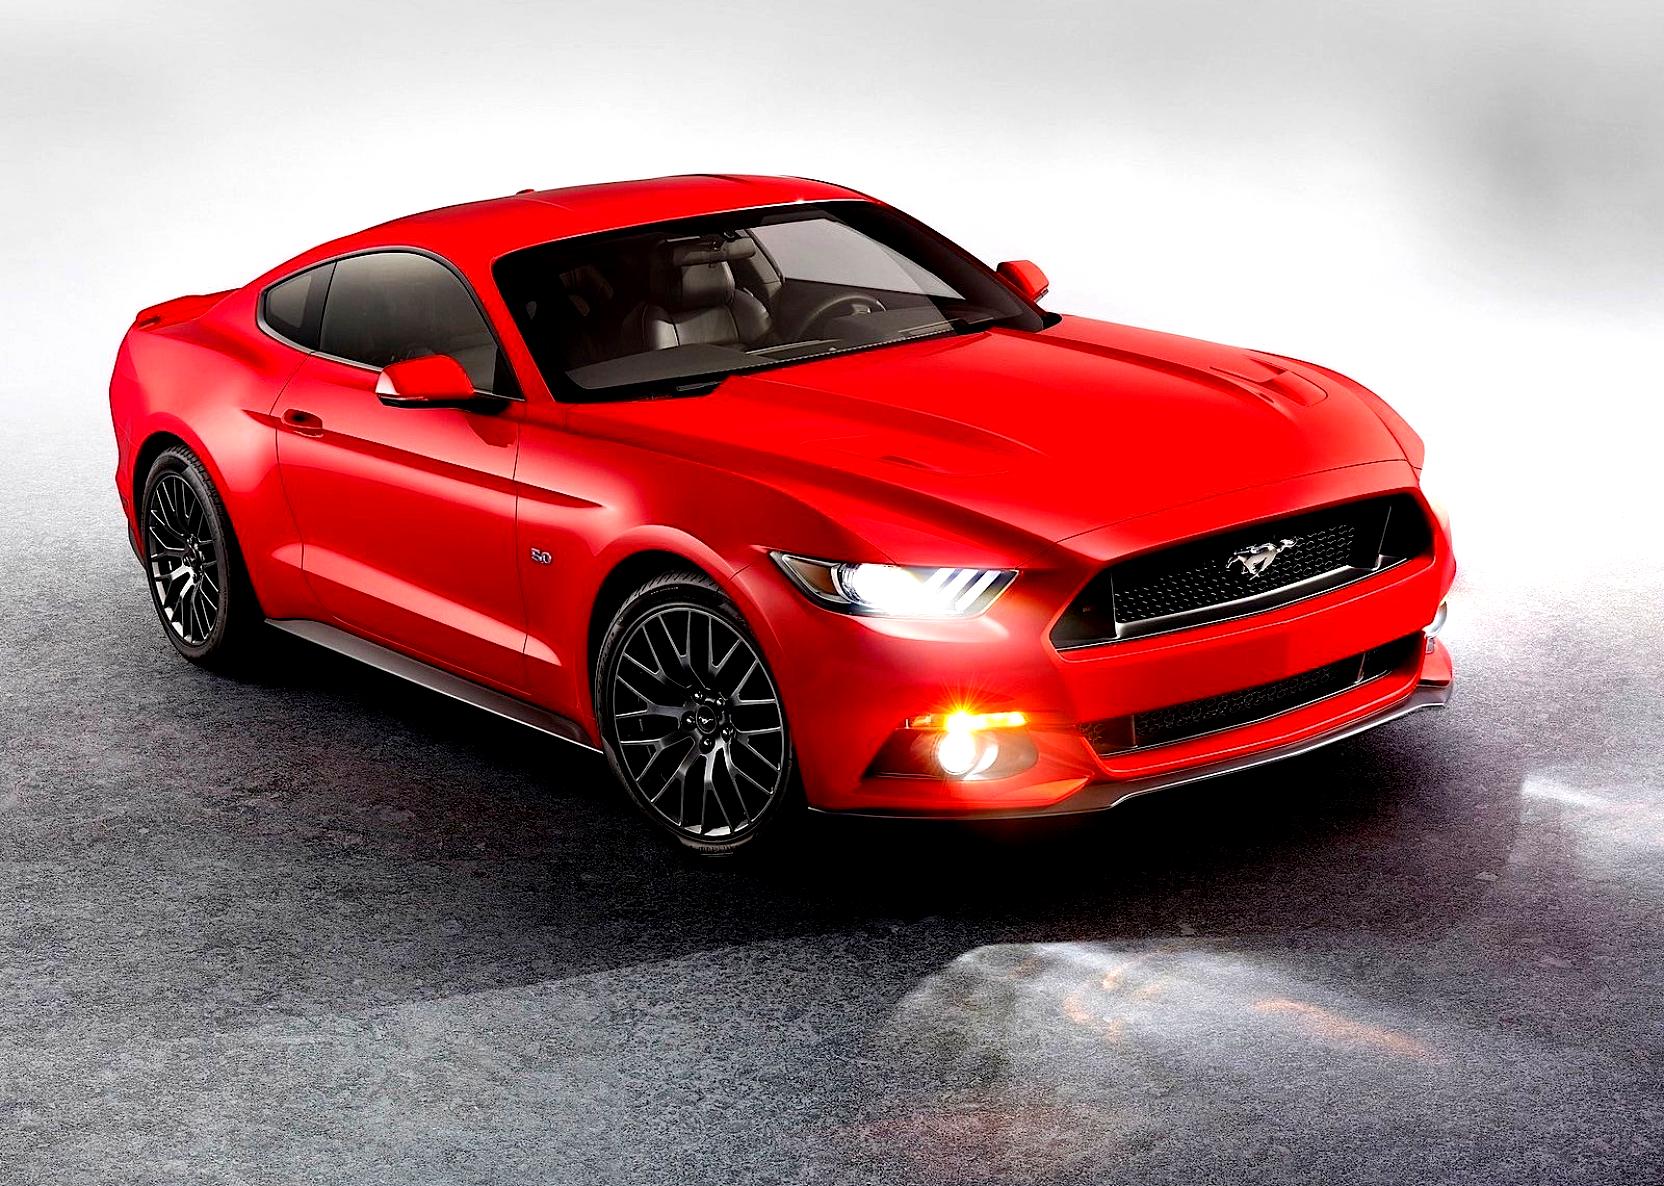 Ford Mustang 2014 #115